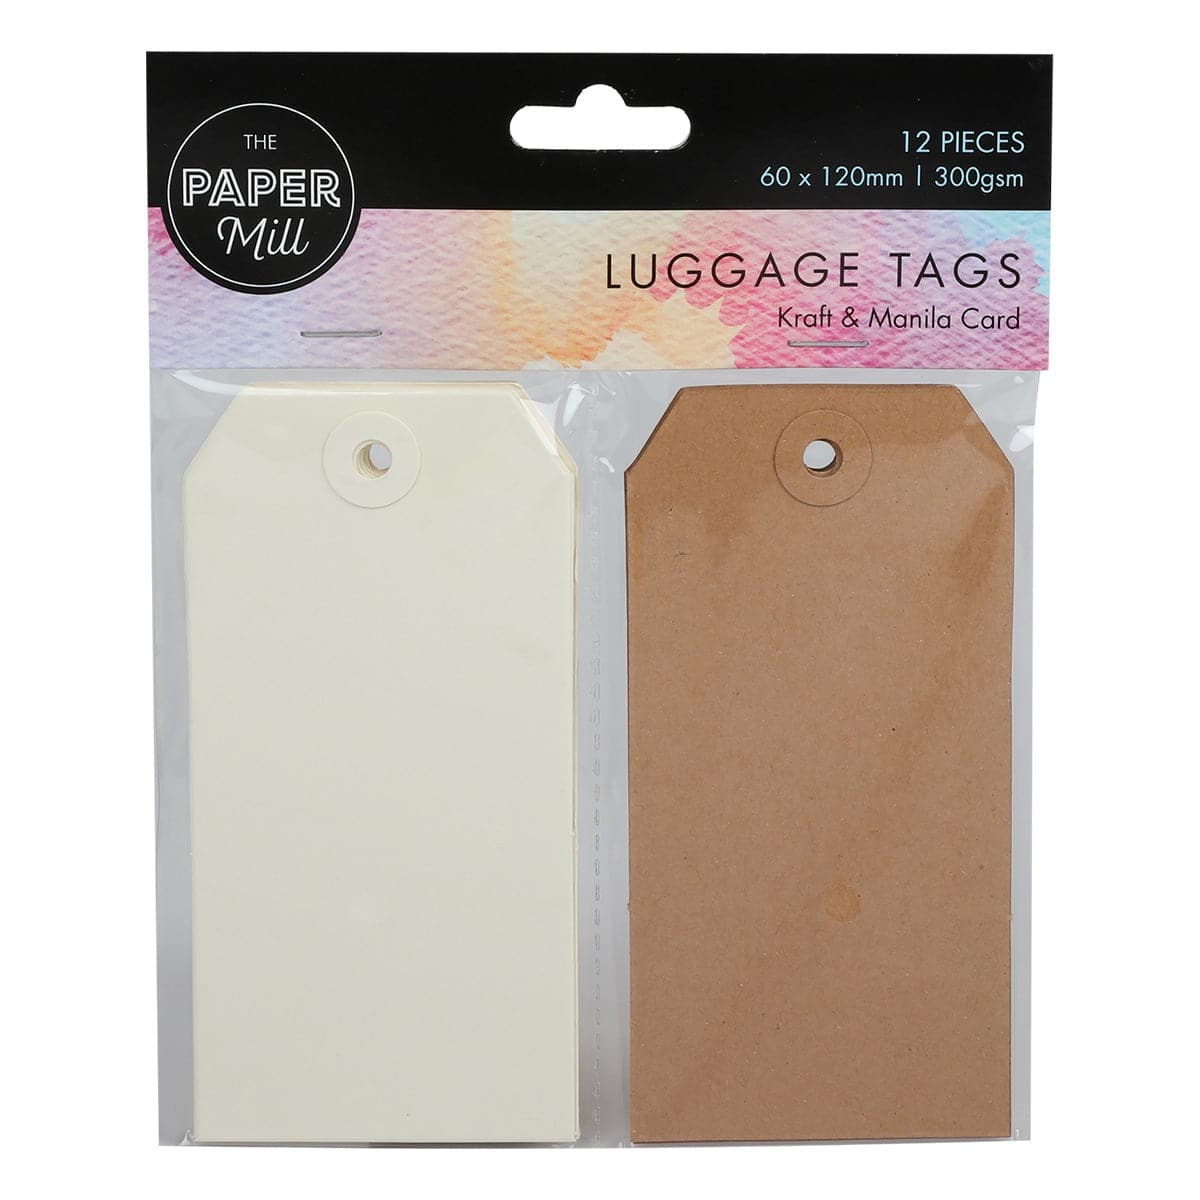 Image of The Paper Mill Medium Kraft and Manila Tags 12 Pieces